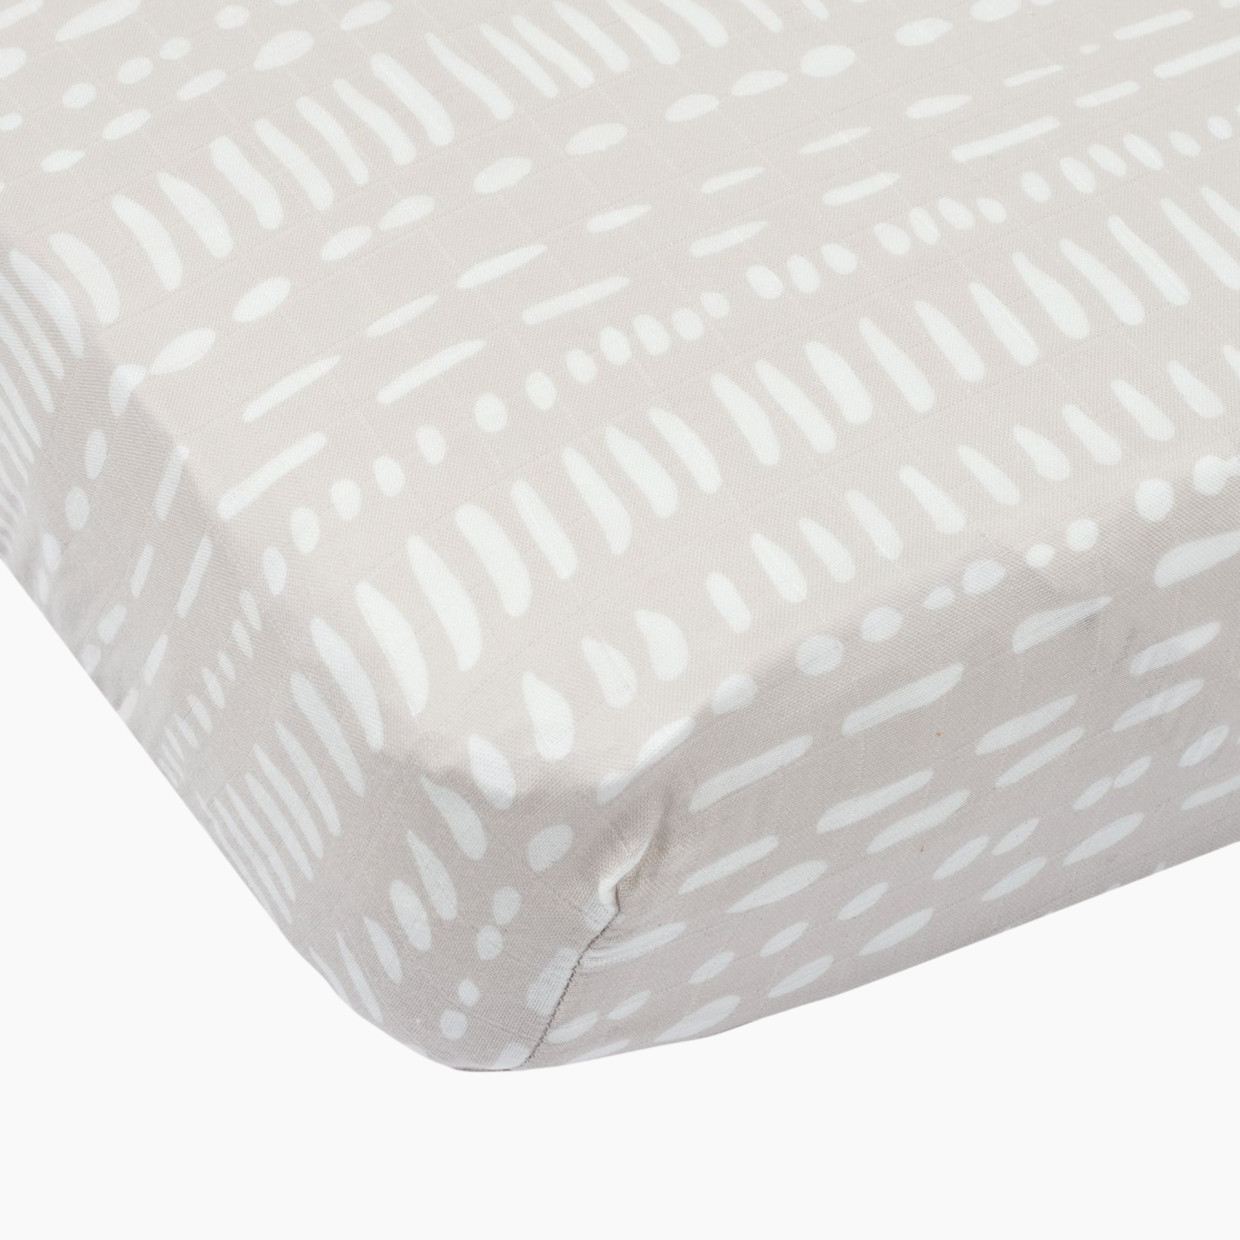 Loulou Lollipop Cotton & Bamboo Fitted Crib Sheet - Grey Mudcloth.